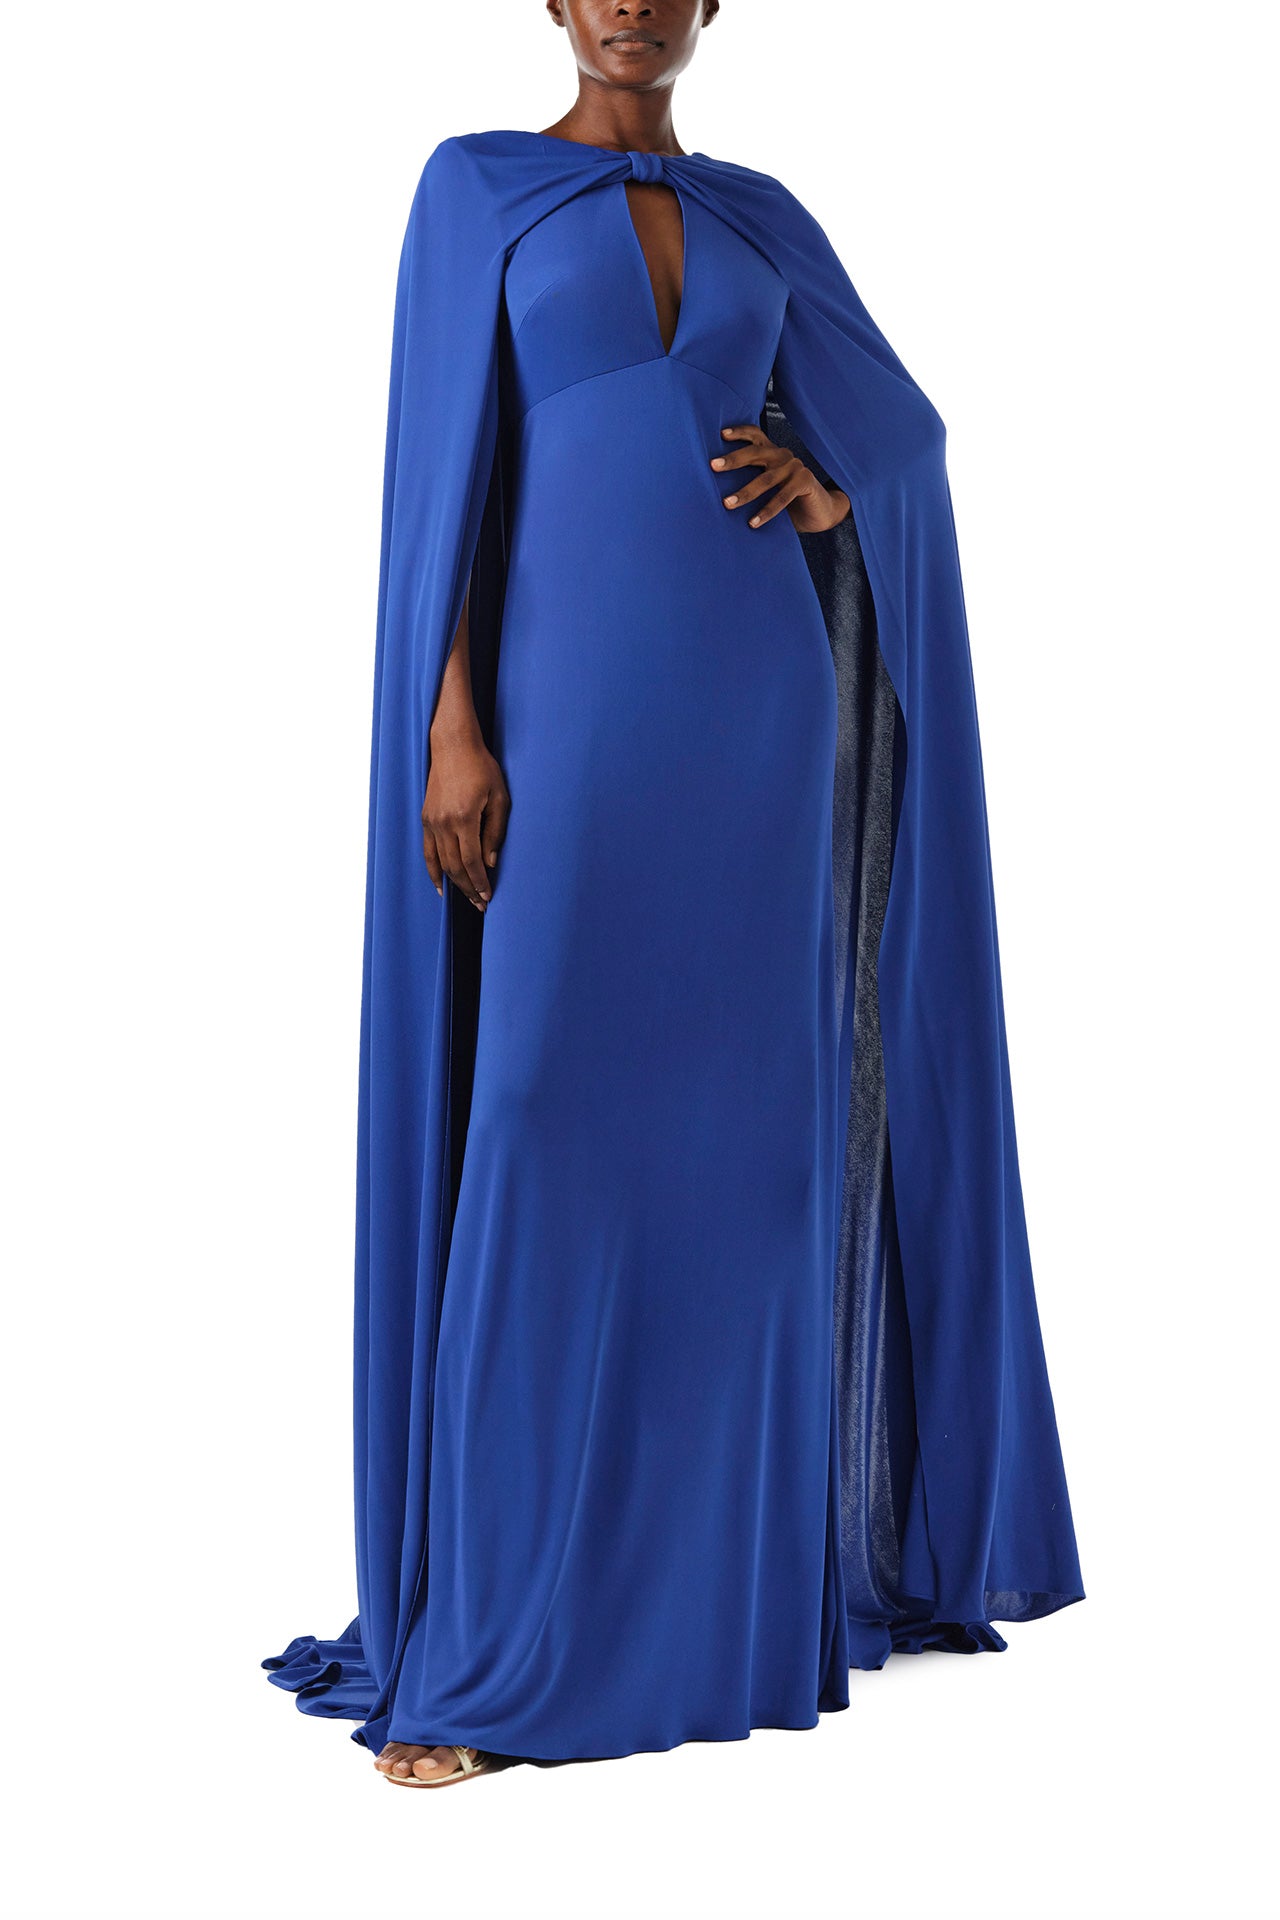 Monique Lhuillier Spring 2024 royal blue crepe-back satin gown with attached cape and keyhole bodice - front.